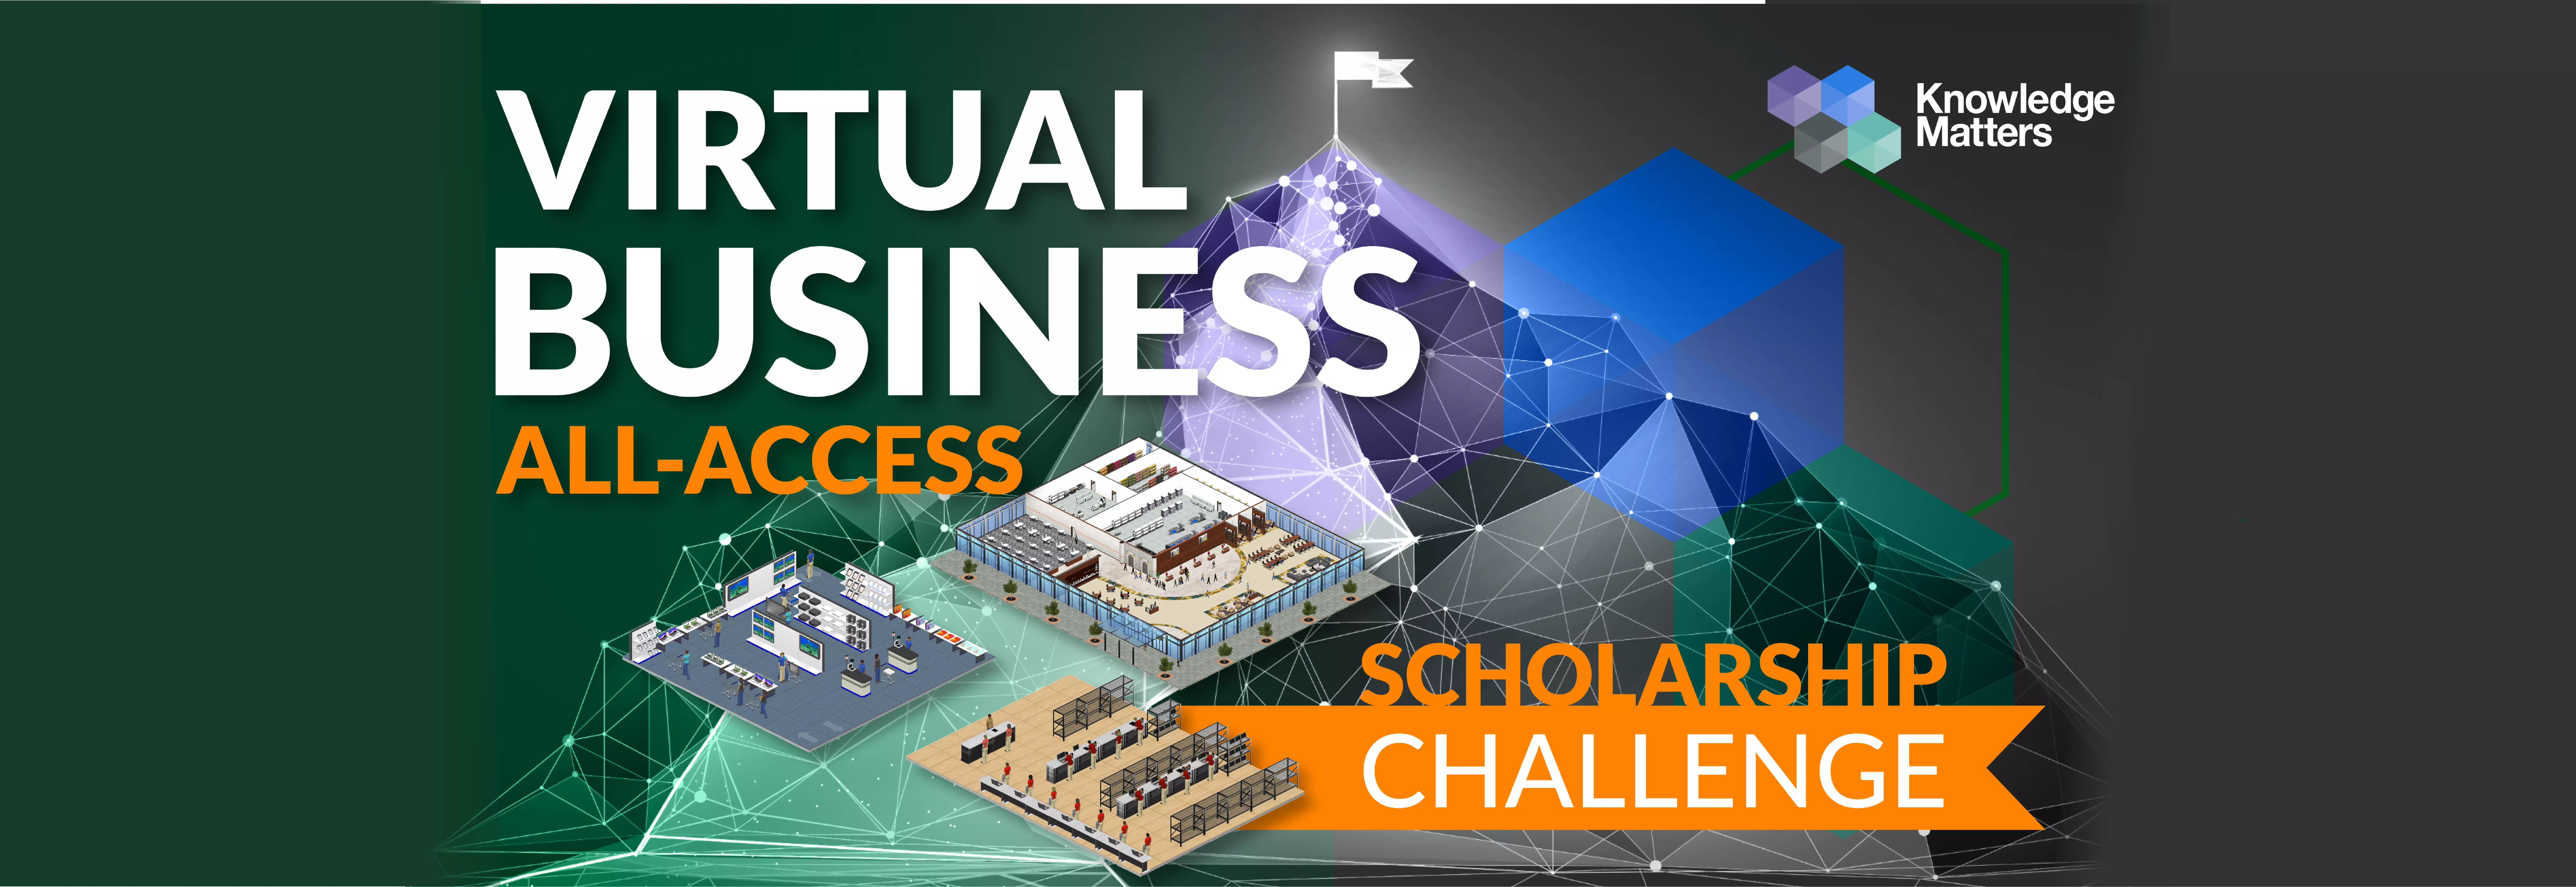 All Accesss Virtual Business Challenge